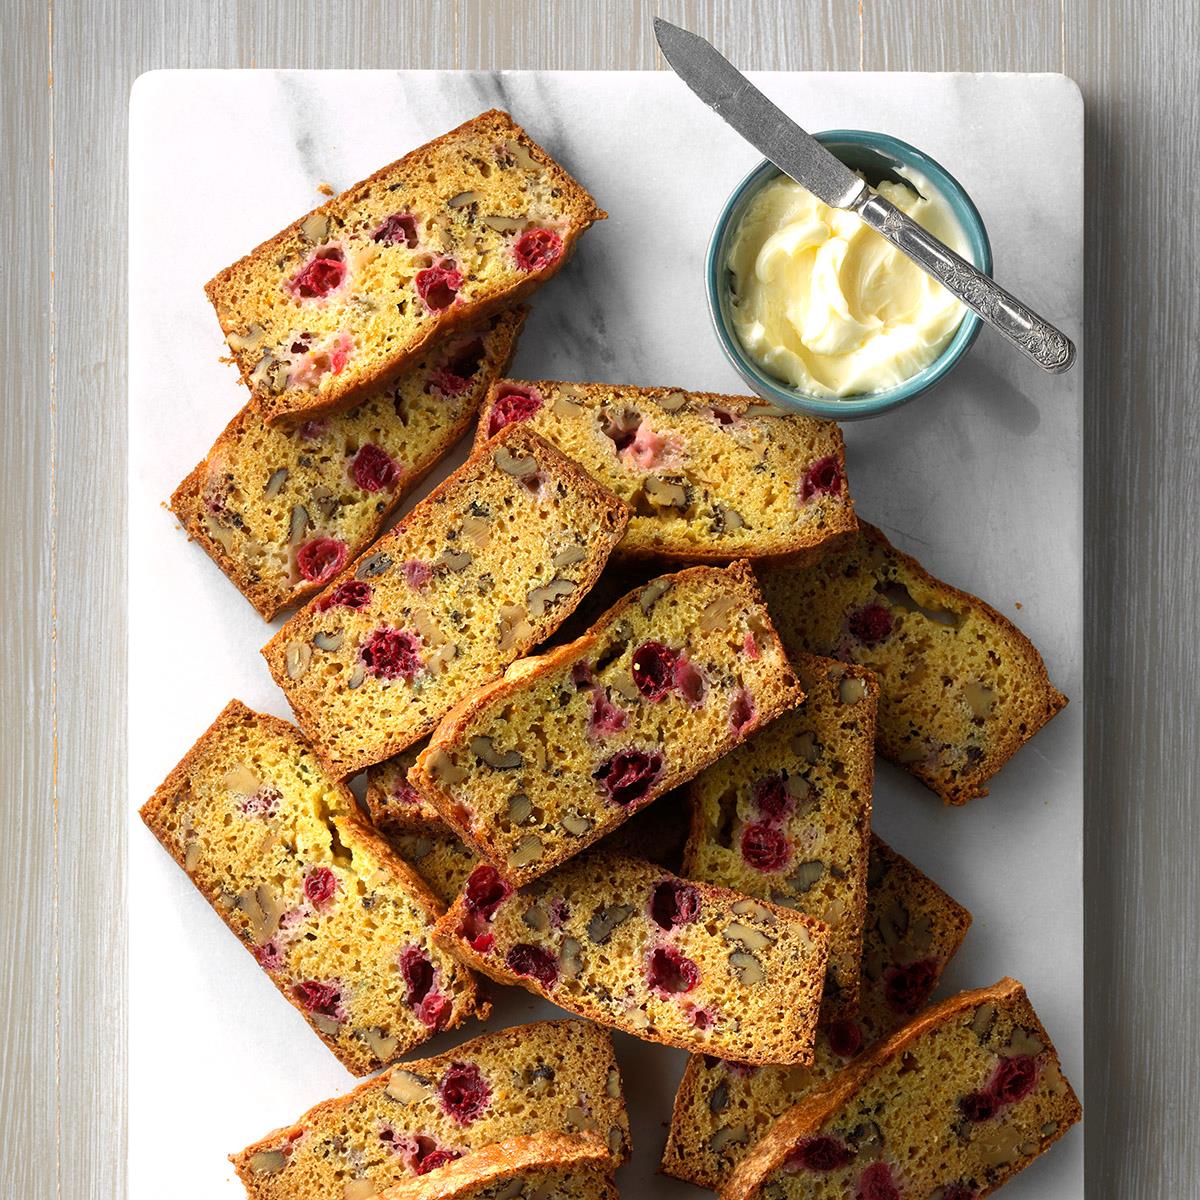 Cranberry Orange Walnut Bread - a healthier way to curb your sweet tooth